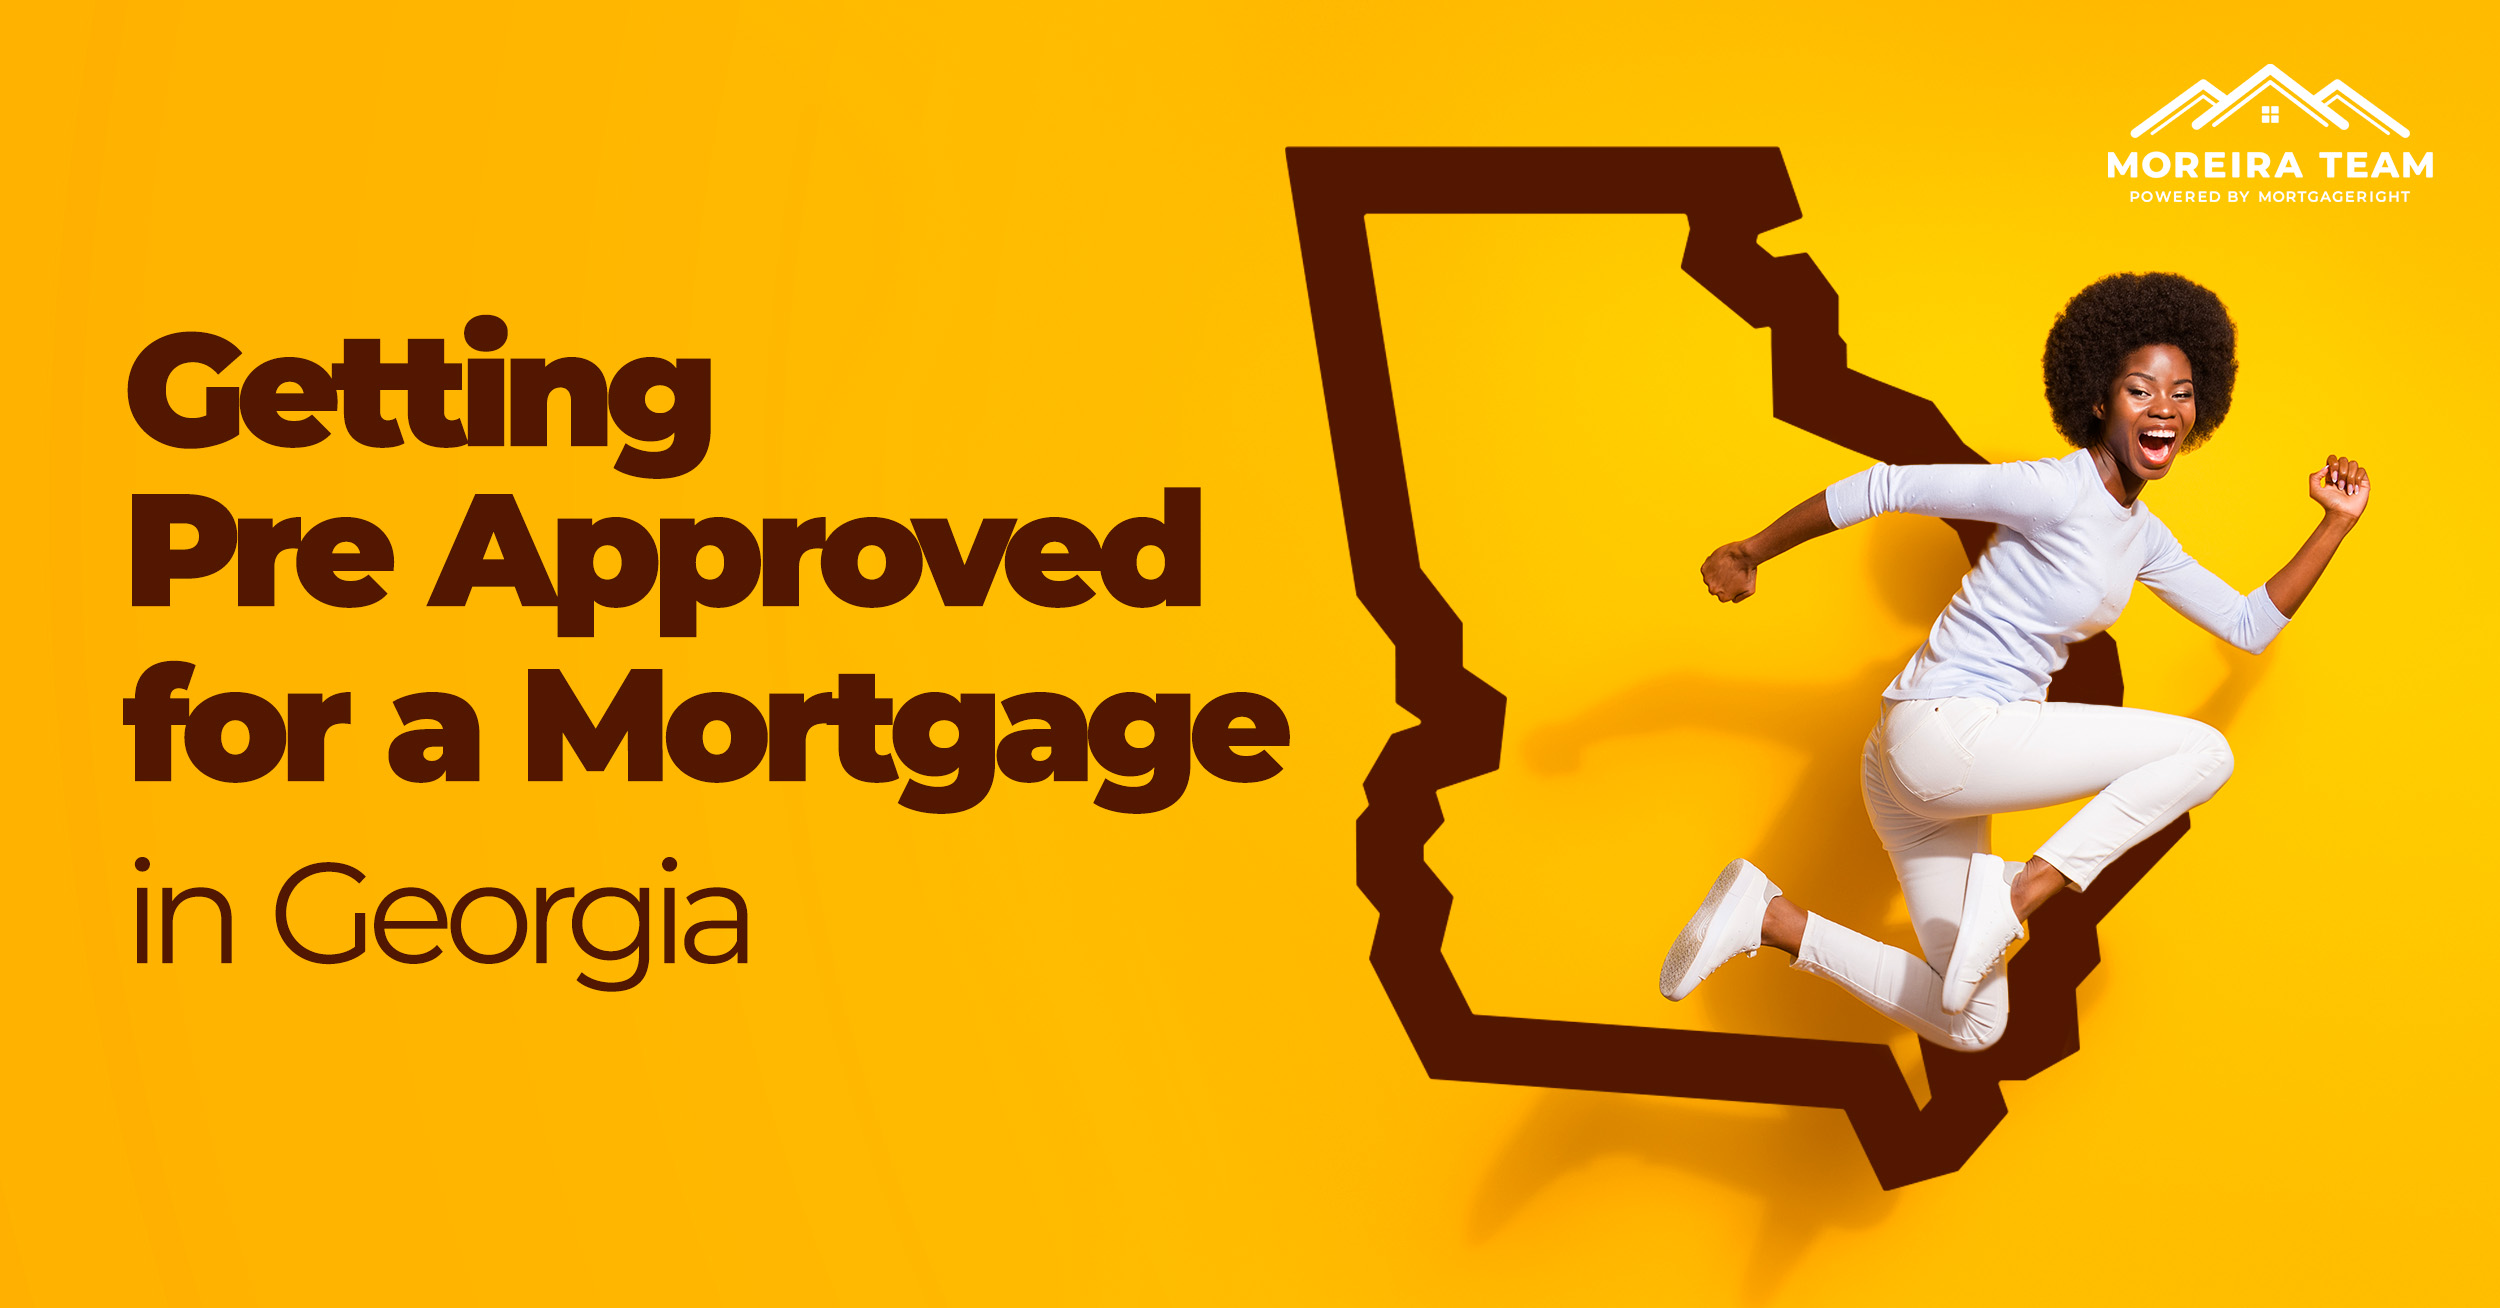 Getting Pre Approved for a Mortgage in Georgia